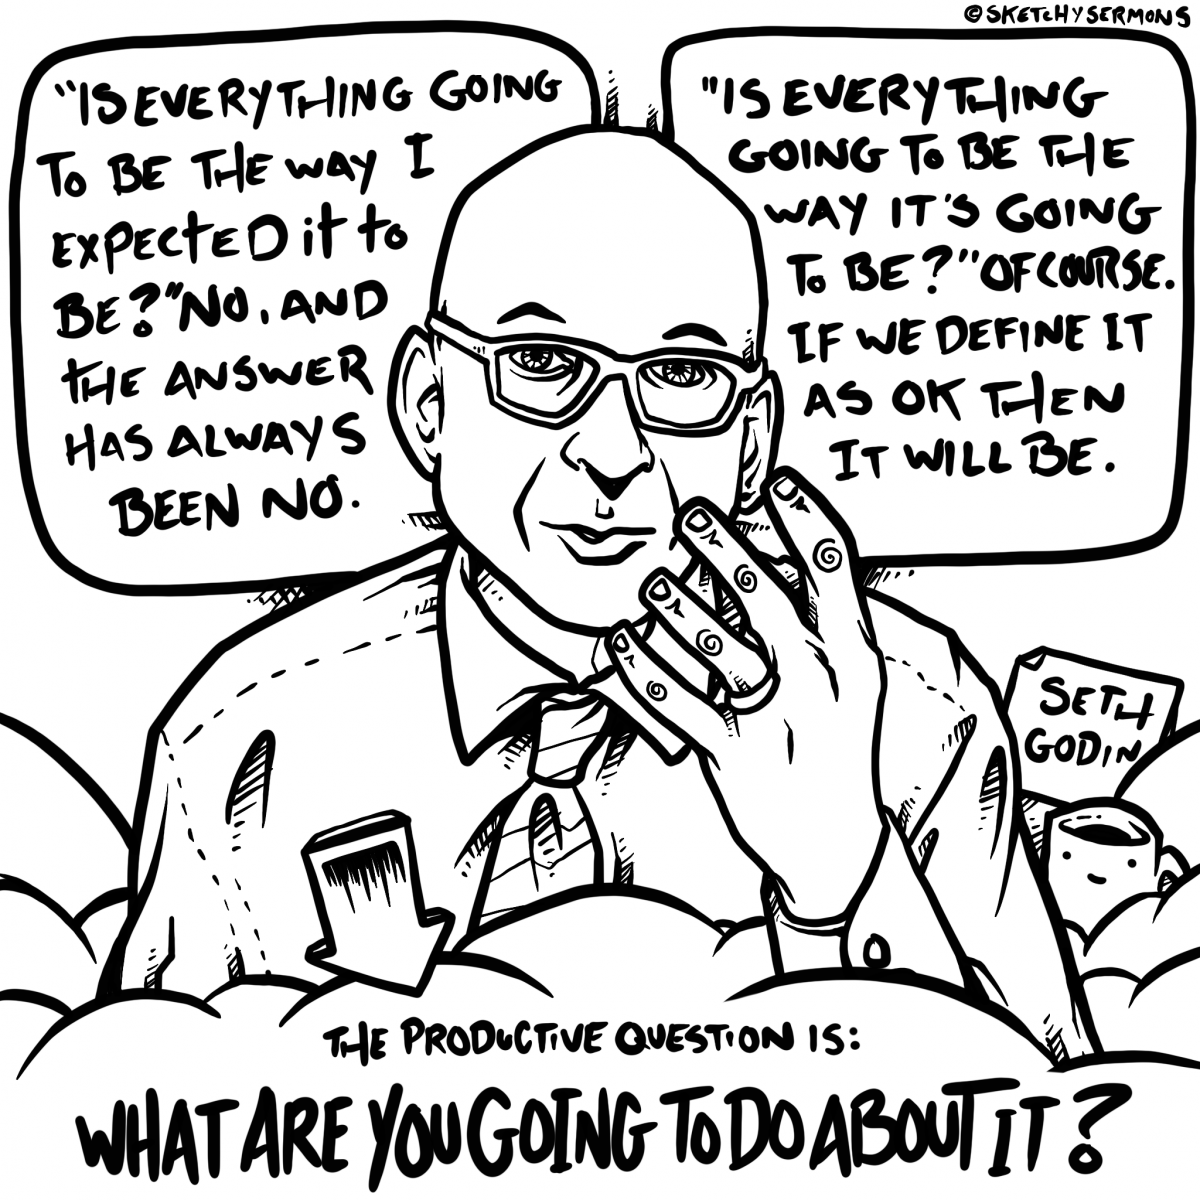 Seth Godin : Is everything going to be ok?